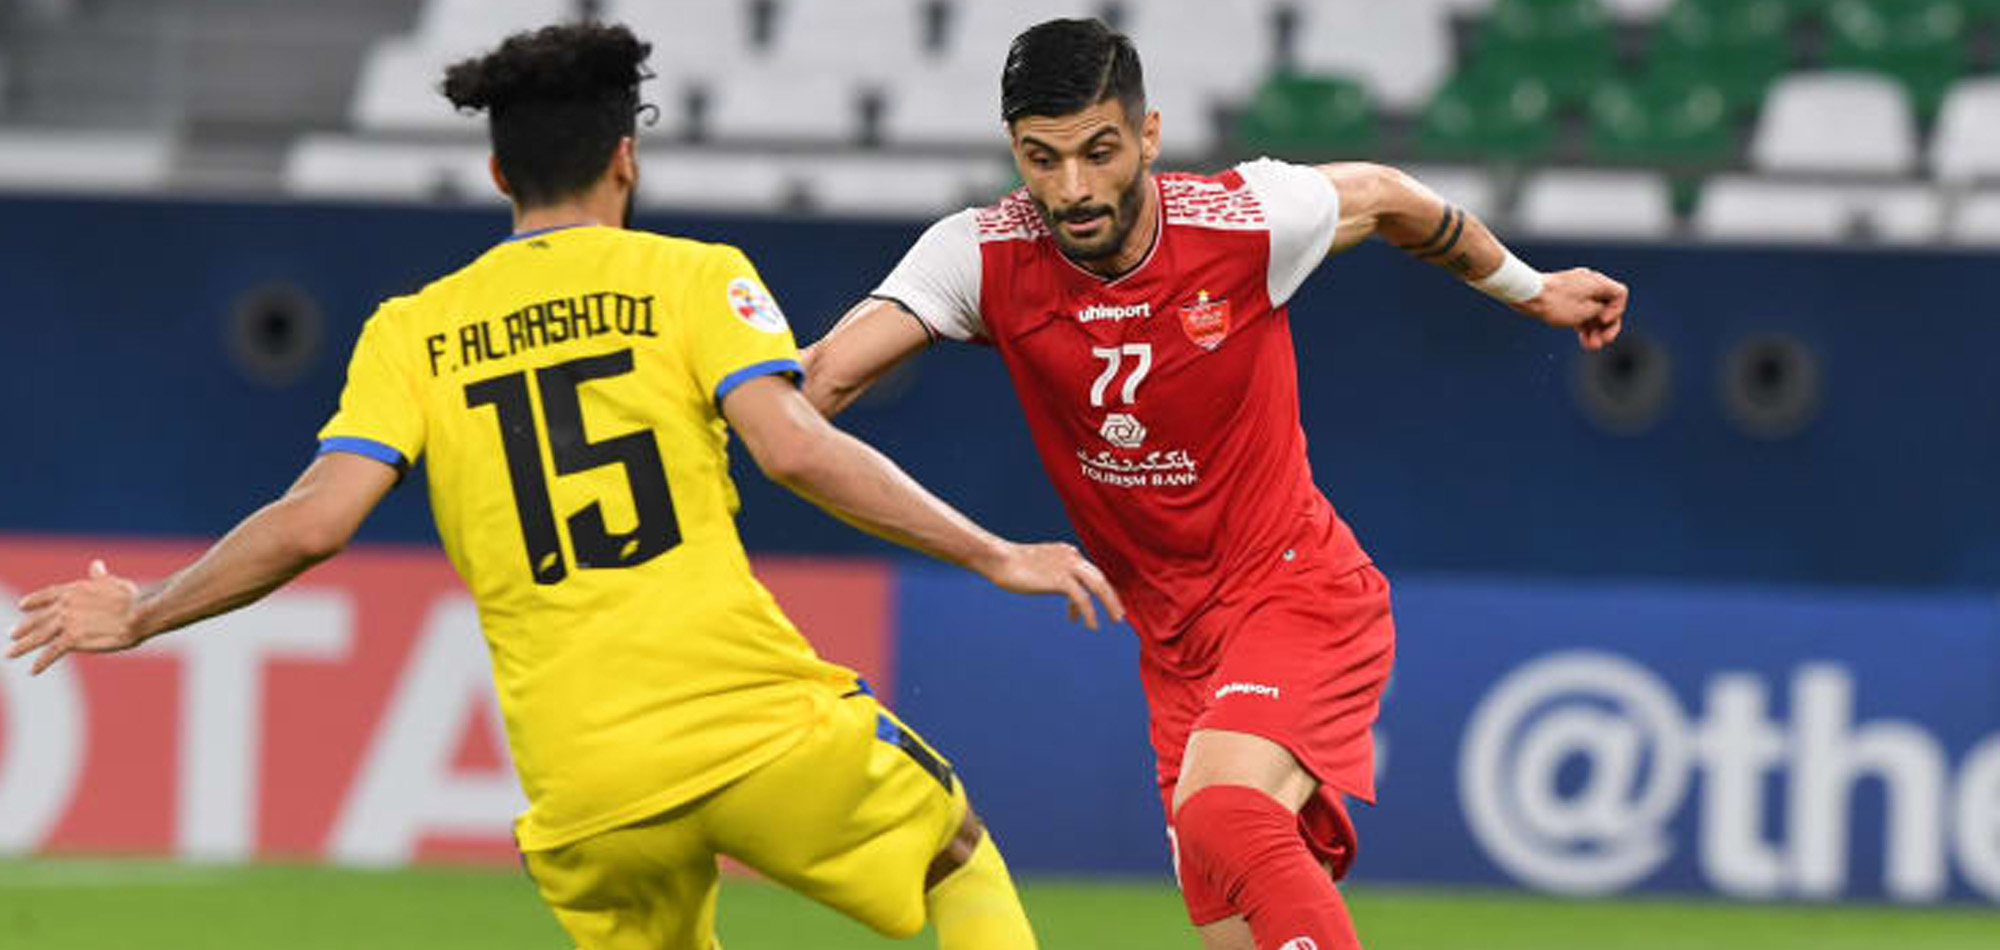 ACL2020 - Group C: Persepolis edge Al Taawoun to stay on track